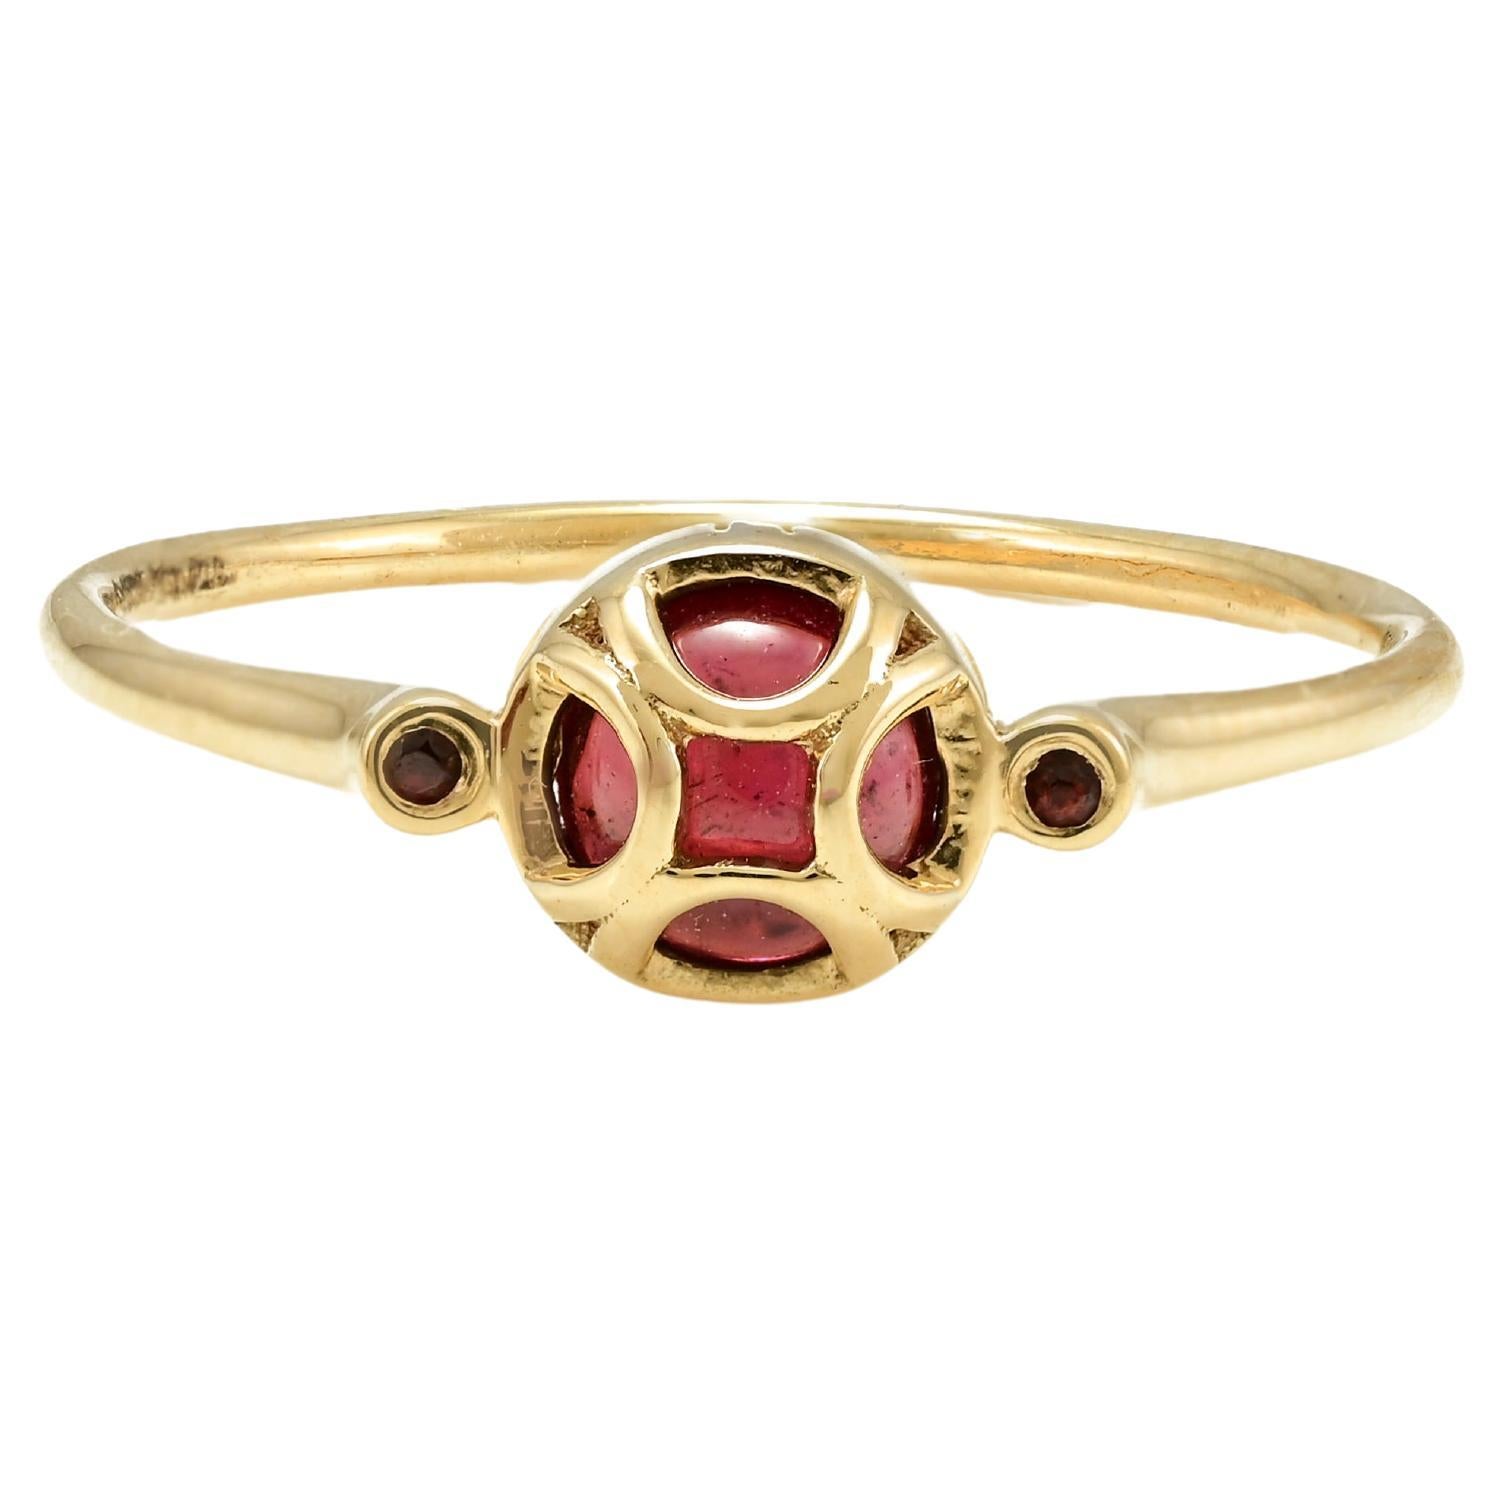 For Sale:  Everyday Minimalist Garnet Ring in 18k Solid Yellow Gold For Her